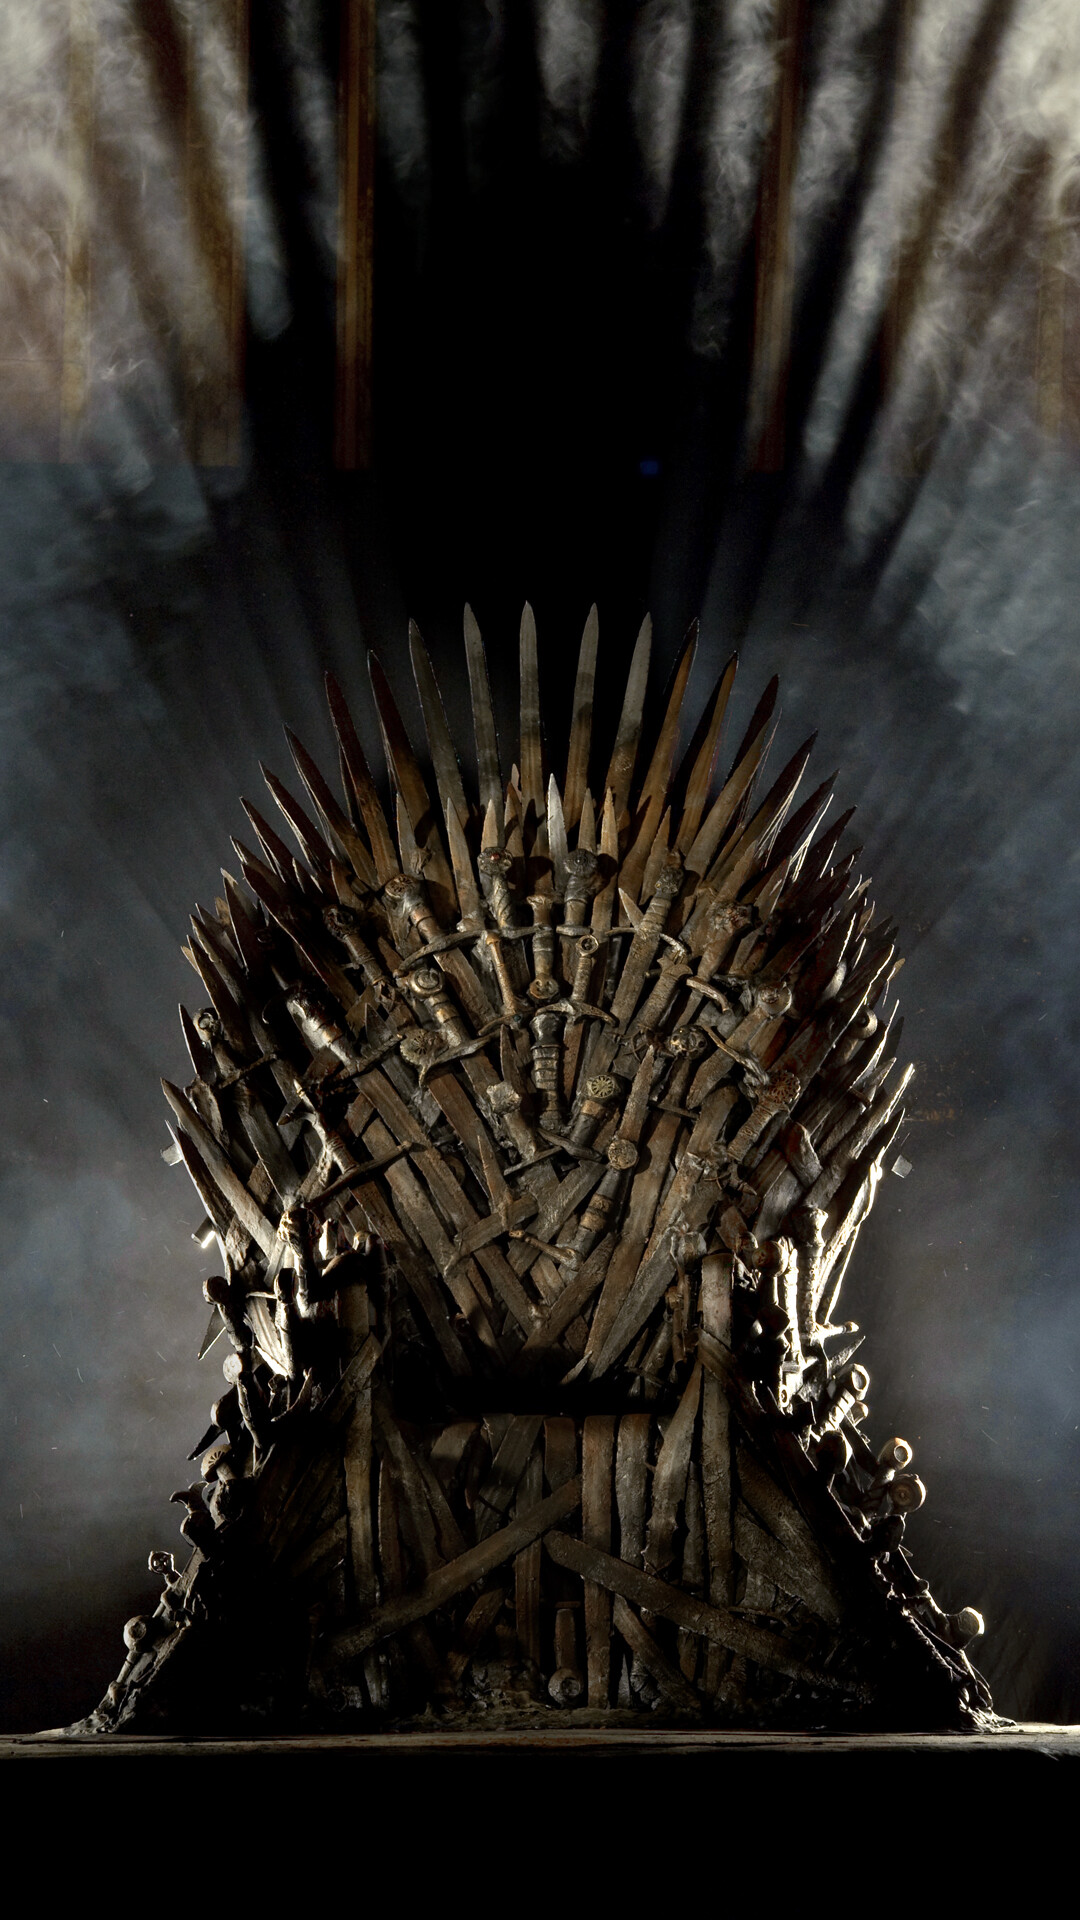 Game of Thrones: Iron Throne, Alan Taylor directed seven episodes, the most of any director. 1080x1920 Full HD Wallpaper.